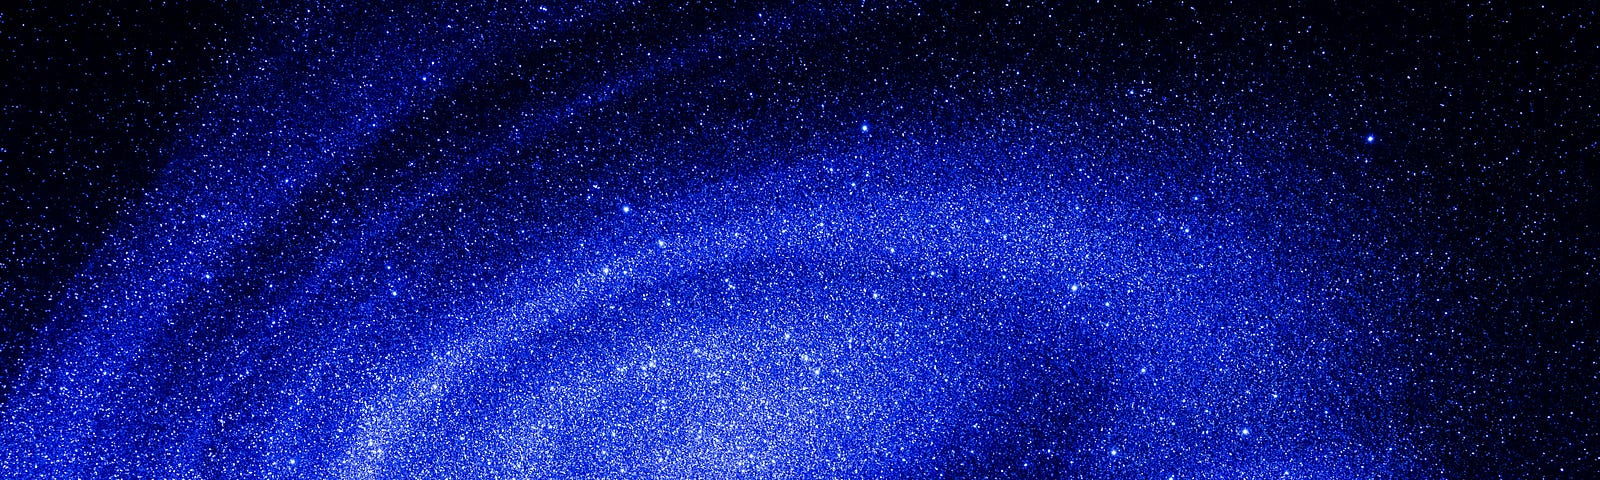 a picture of the milky way galaxy in blue